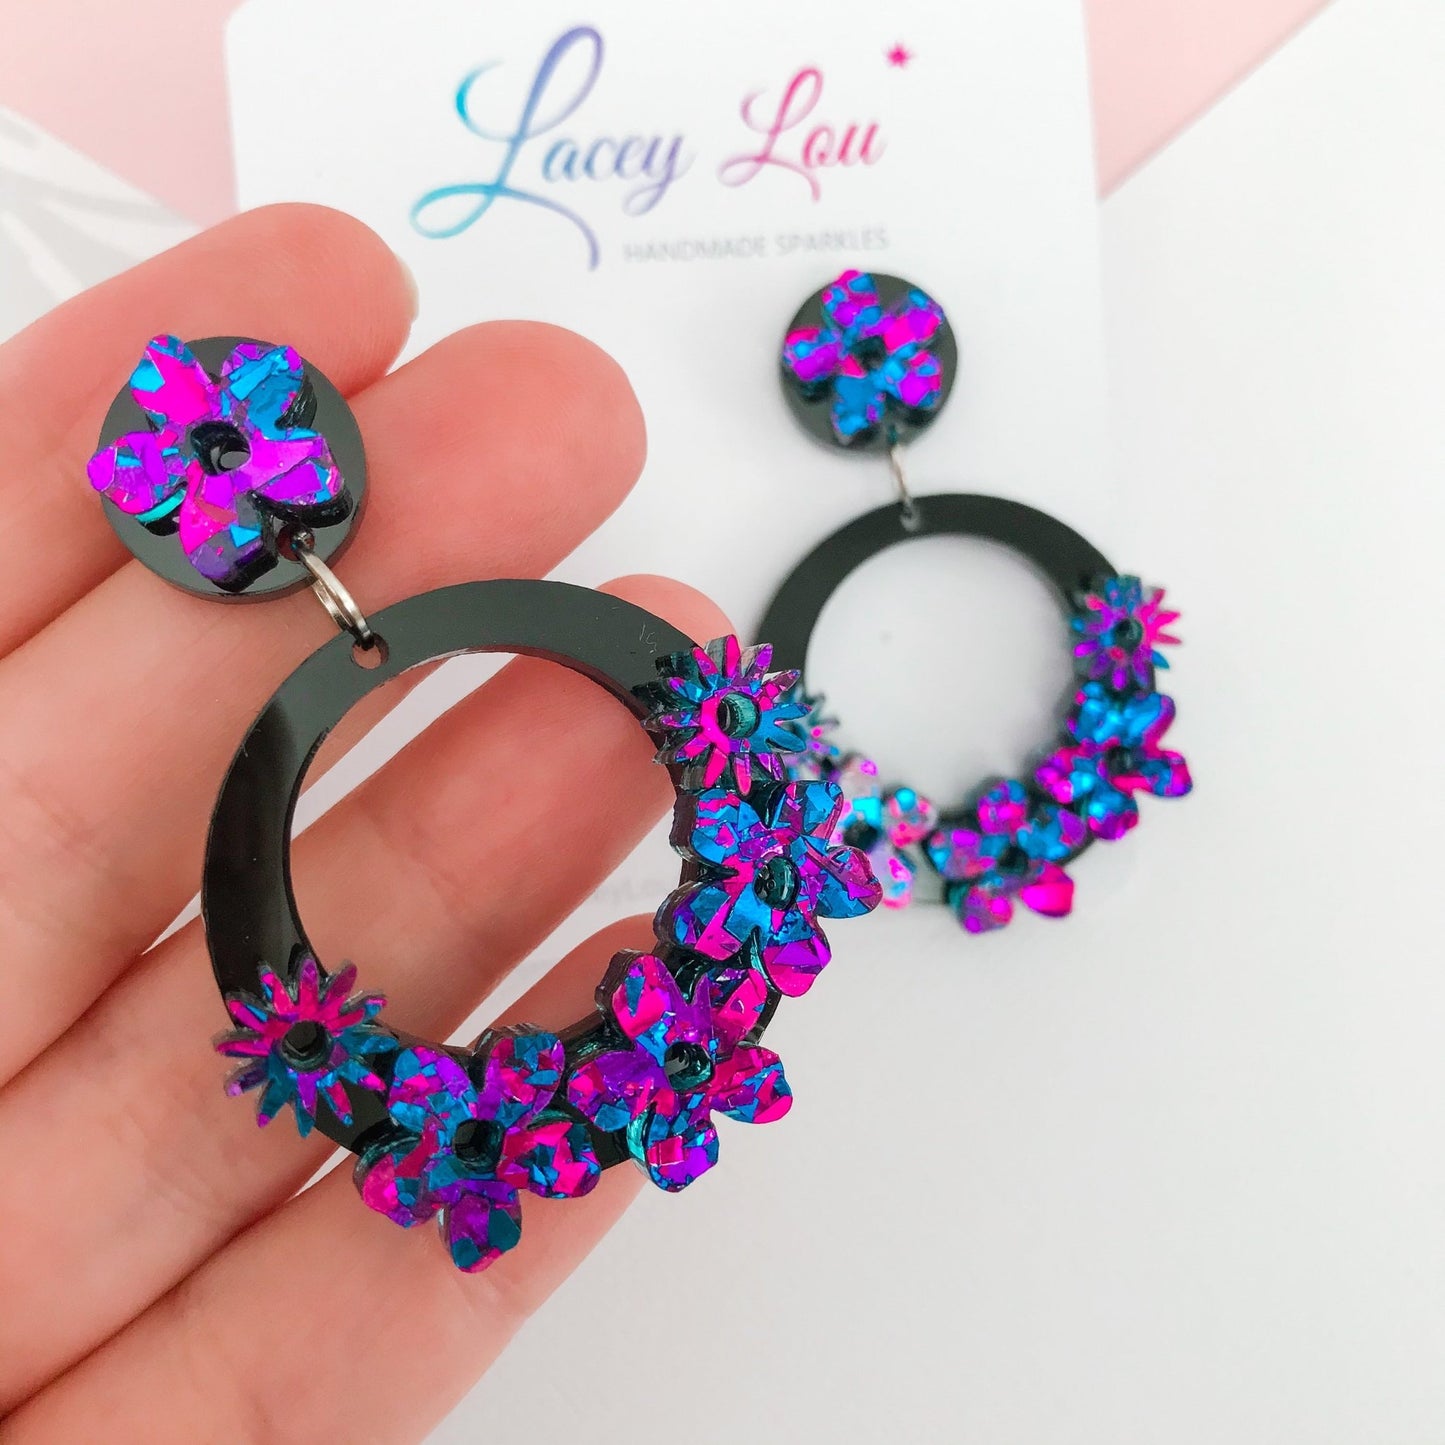 Statement Round Floral Dangles - Midnight Blue and Black Acrylic Earrings - Lacey Lou Sparkles